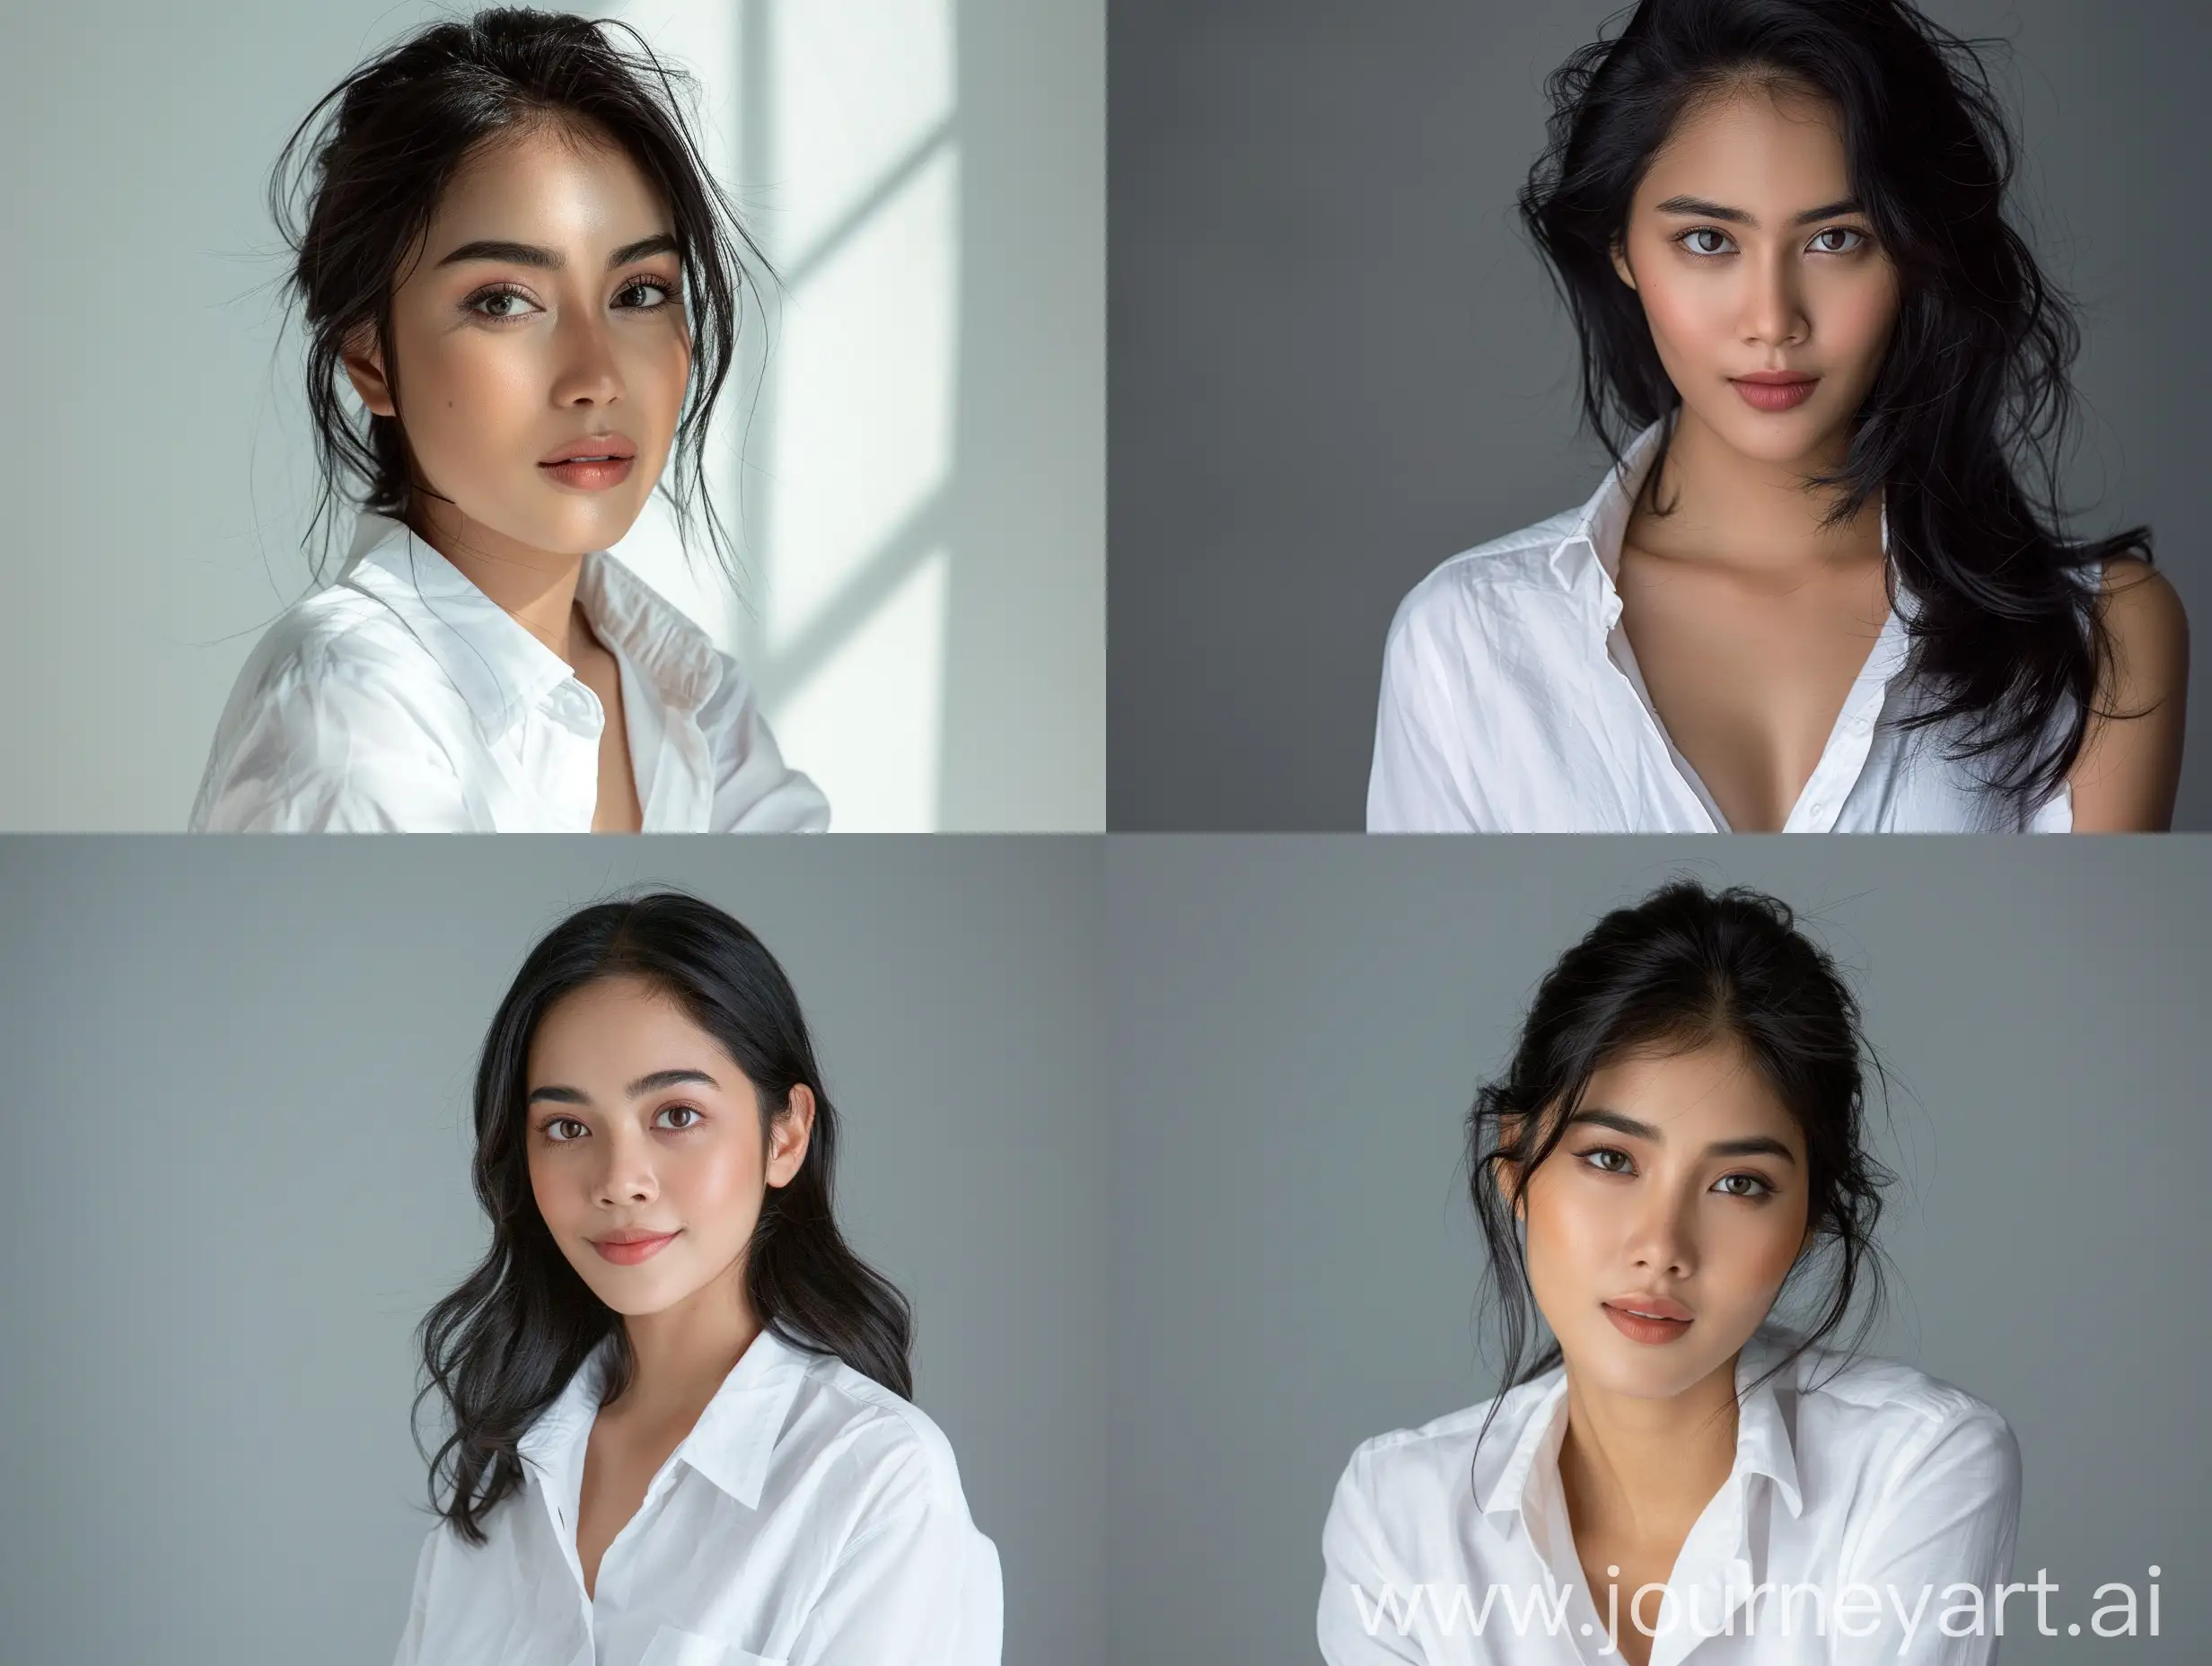 Indonesian-Television-Presenter-Portrait-of-Beauty-in-a-White-Shirt